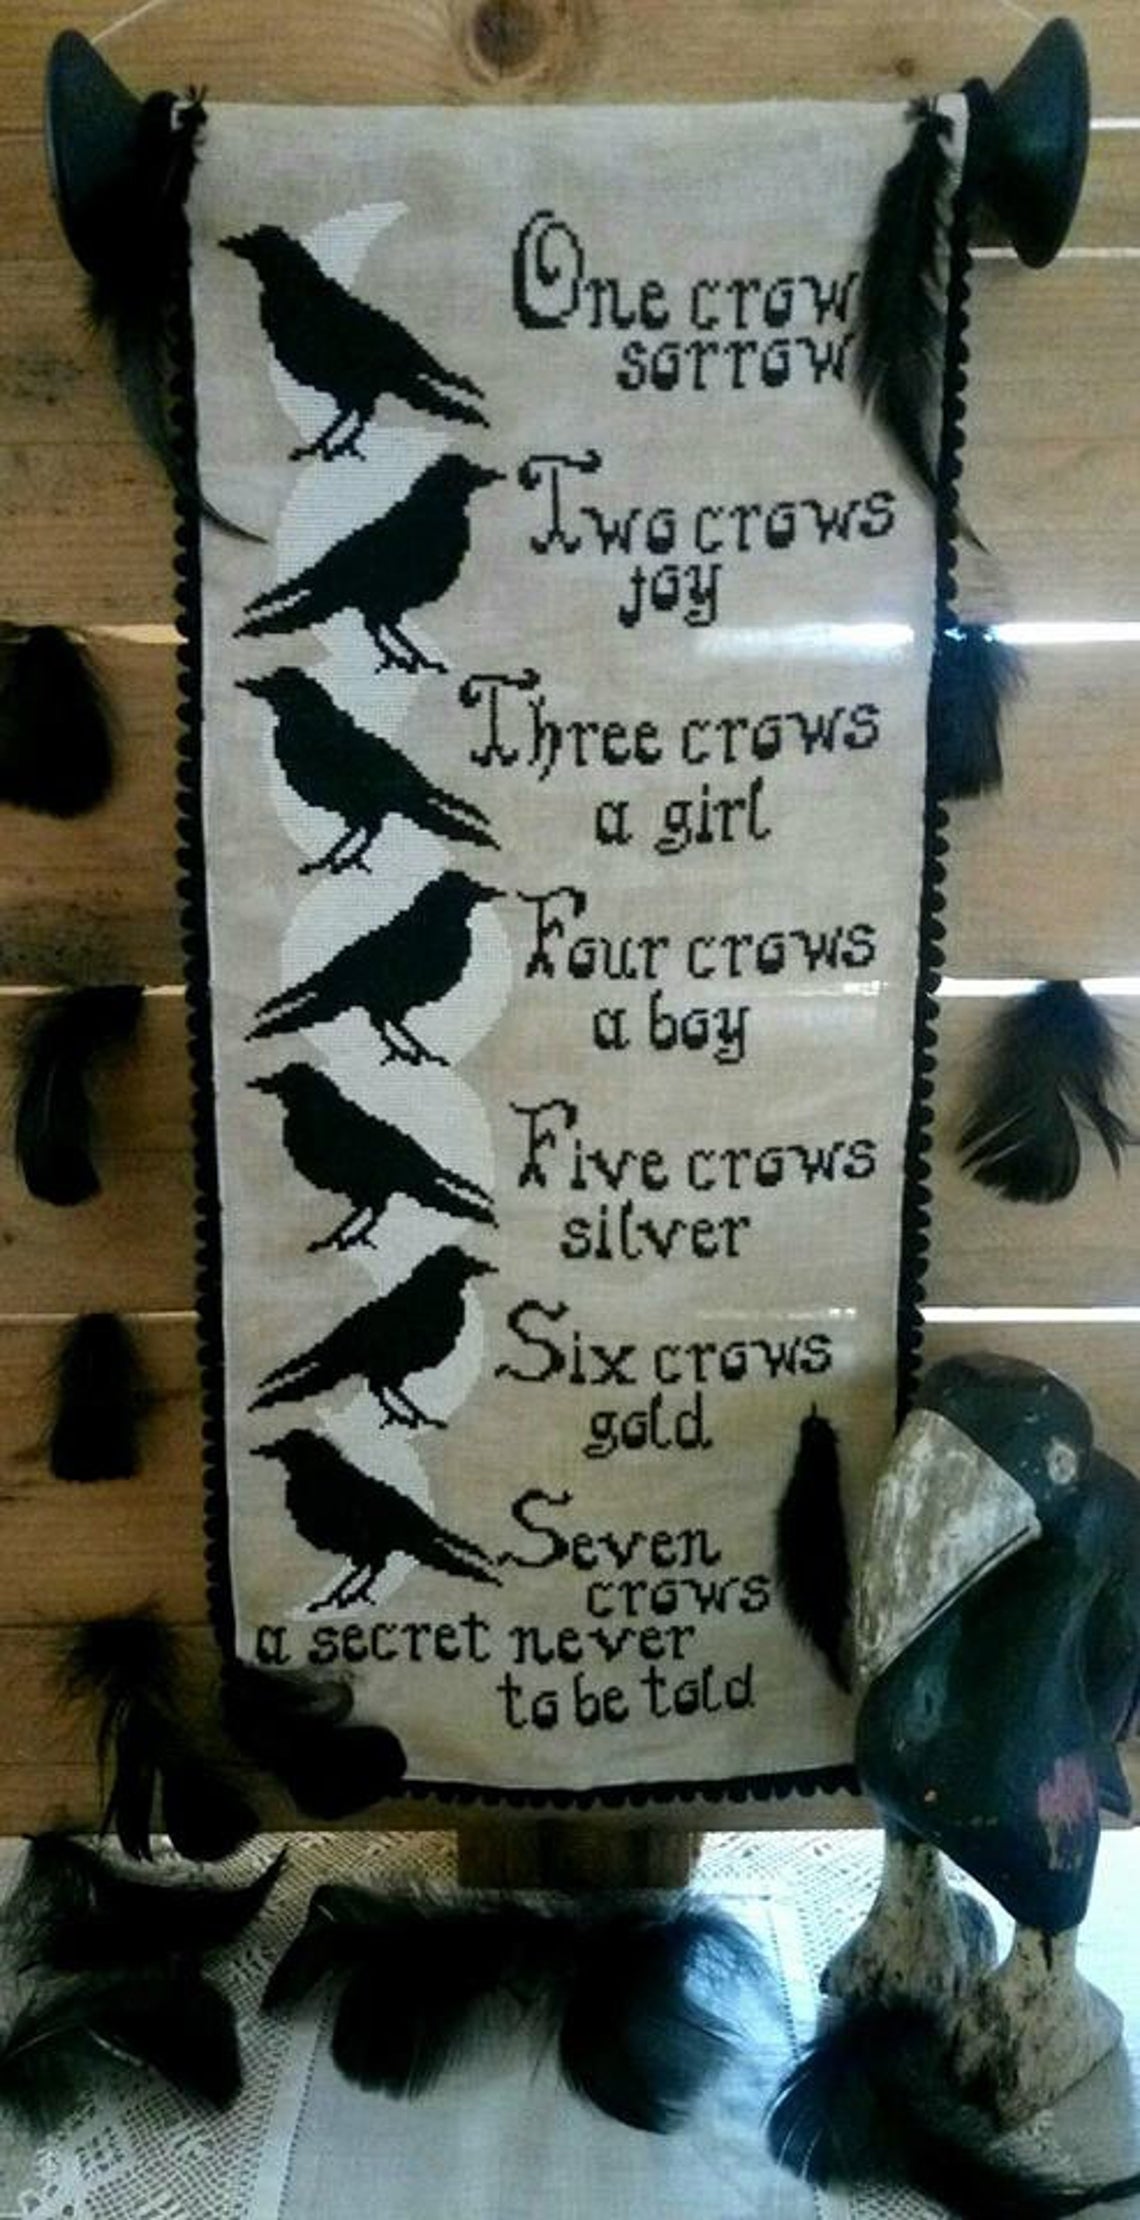 7 Crows